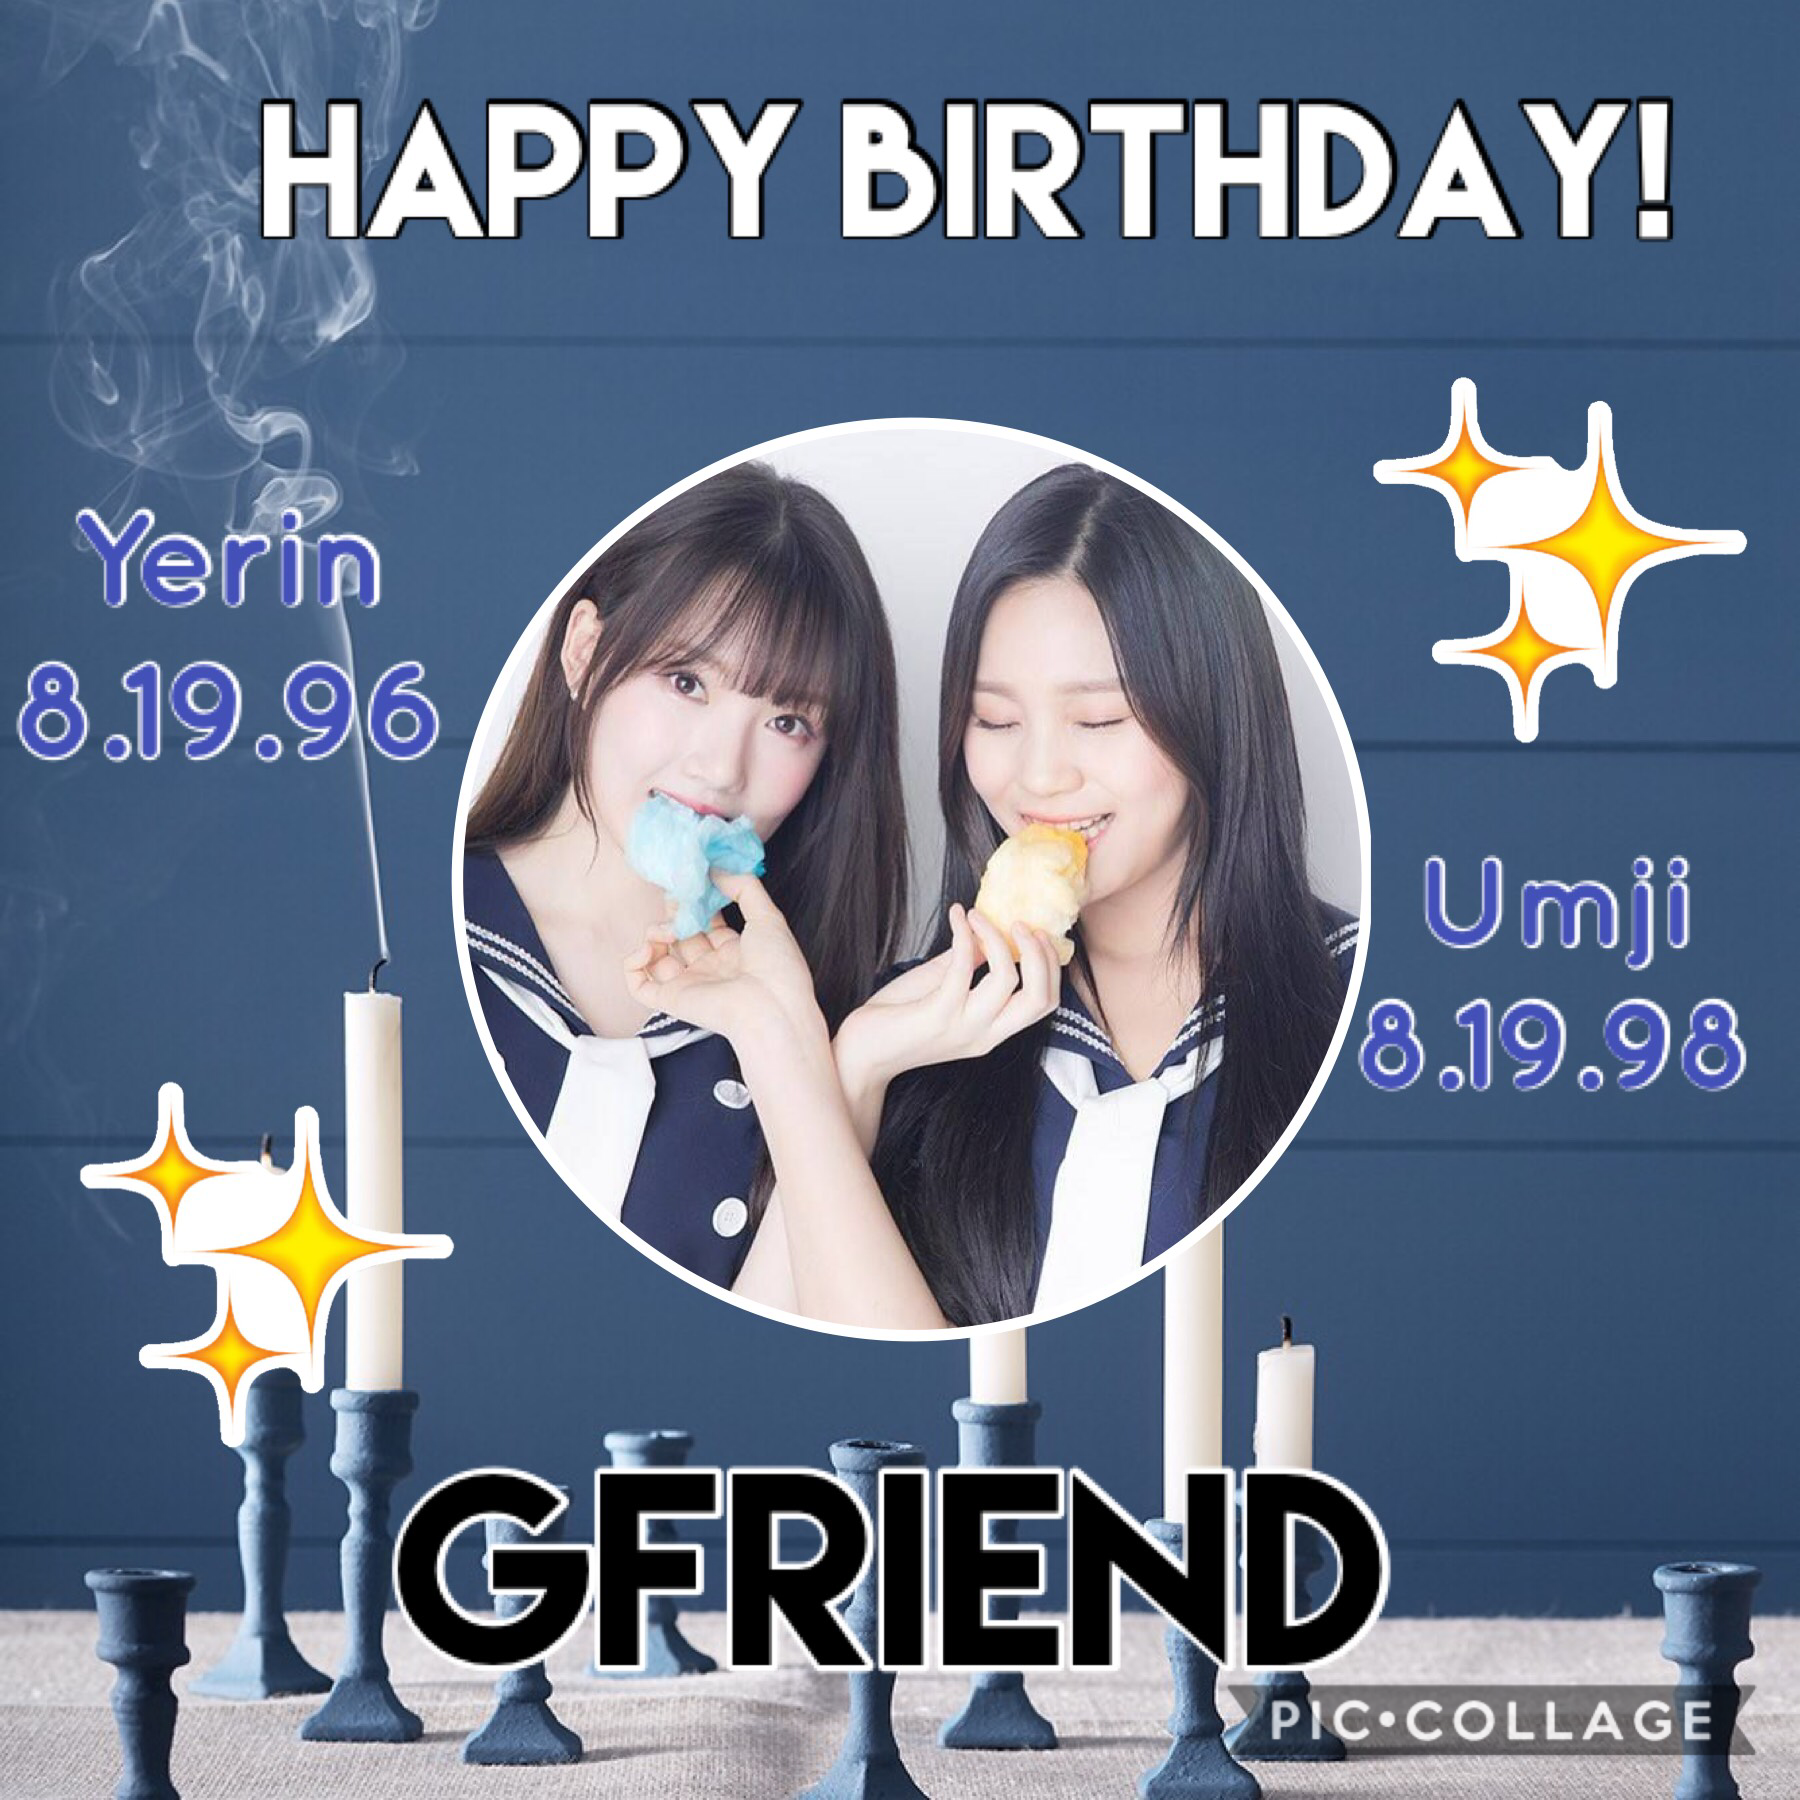 •🍃🎉•
Happy birthday!!! That’s amazing how they’re in the same band and have the same birthdays haha❤️
Other birthdays today:
•Bona from WJSN
🍃🌴🍃🌴Whoop🌴🍃🌴🍃